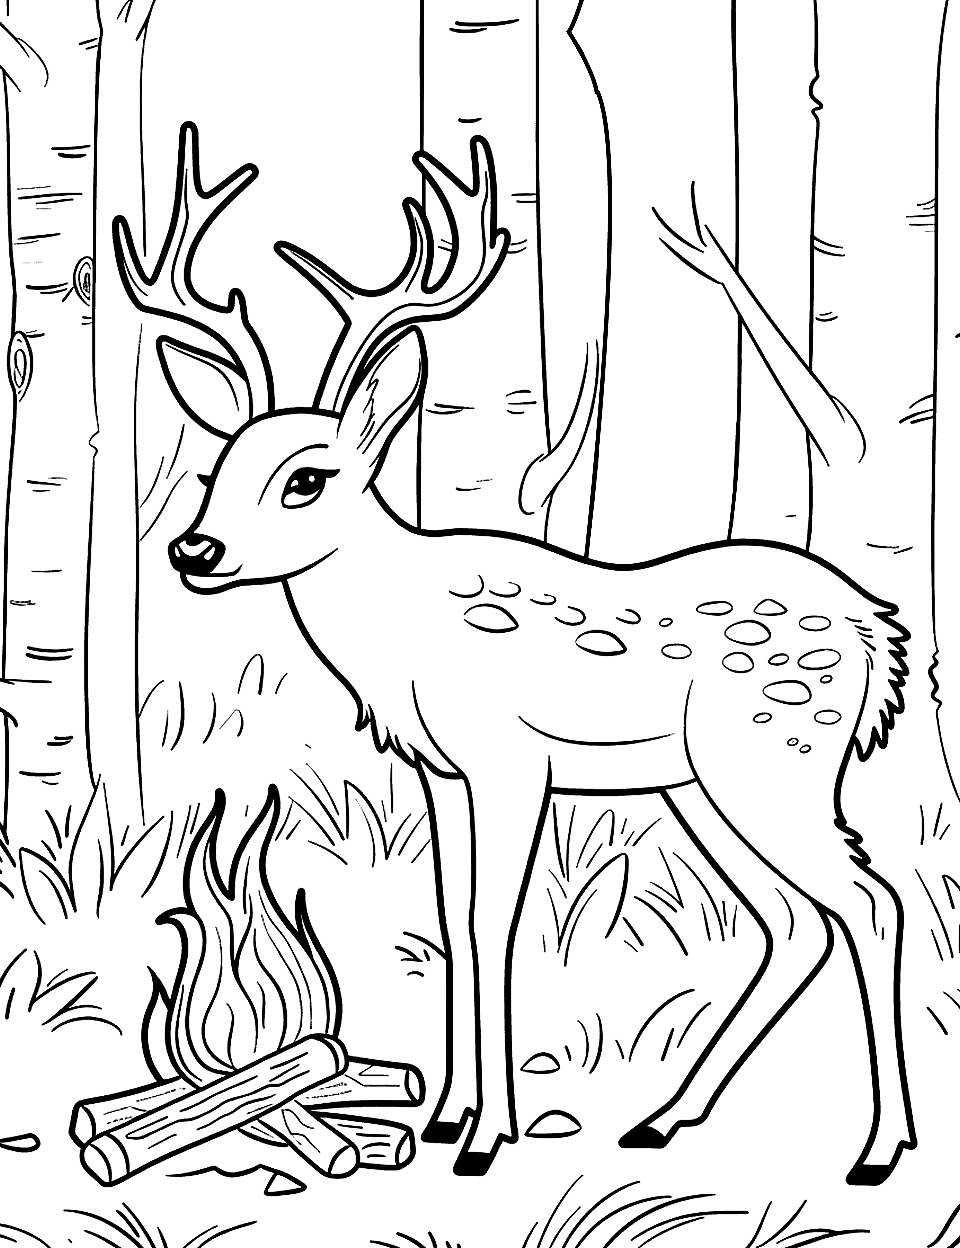 Deer by a Cozy Campfire Coloring Page - A scene of a deer curiously observing a small, cozy campfire in the woods.